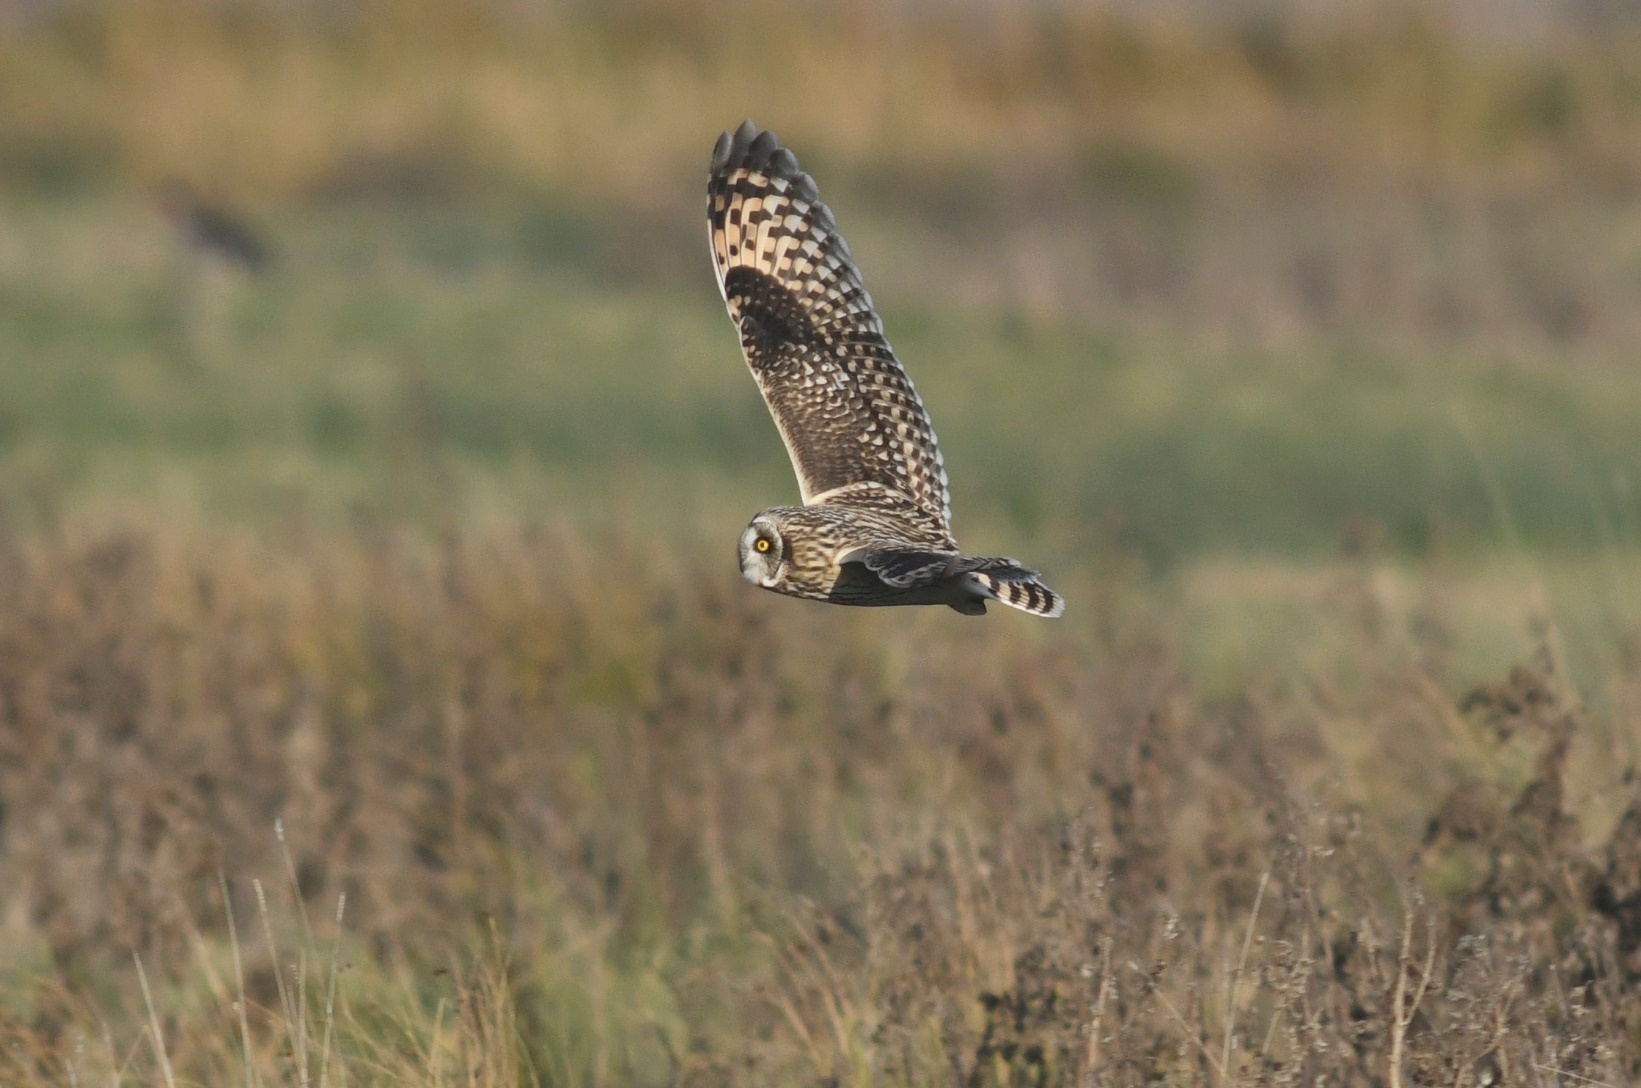 A hawk standing on a dry grass field

Description automatically generated